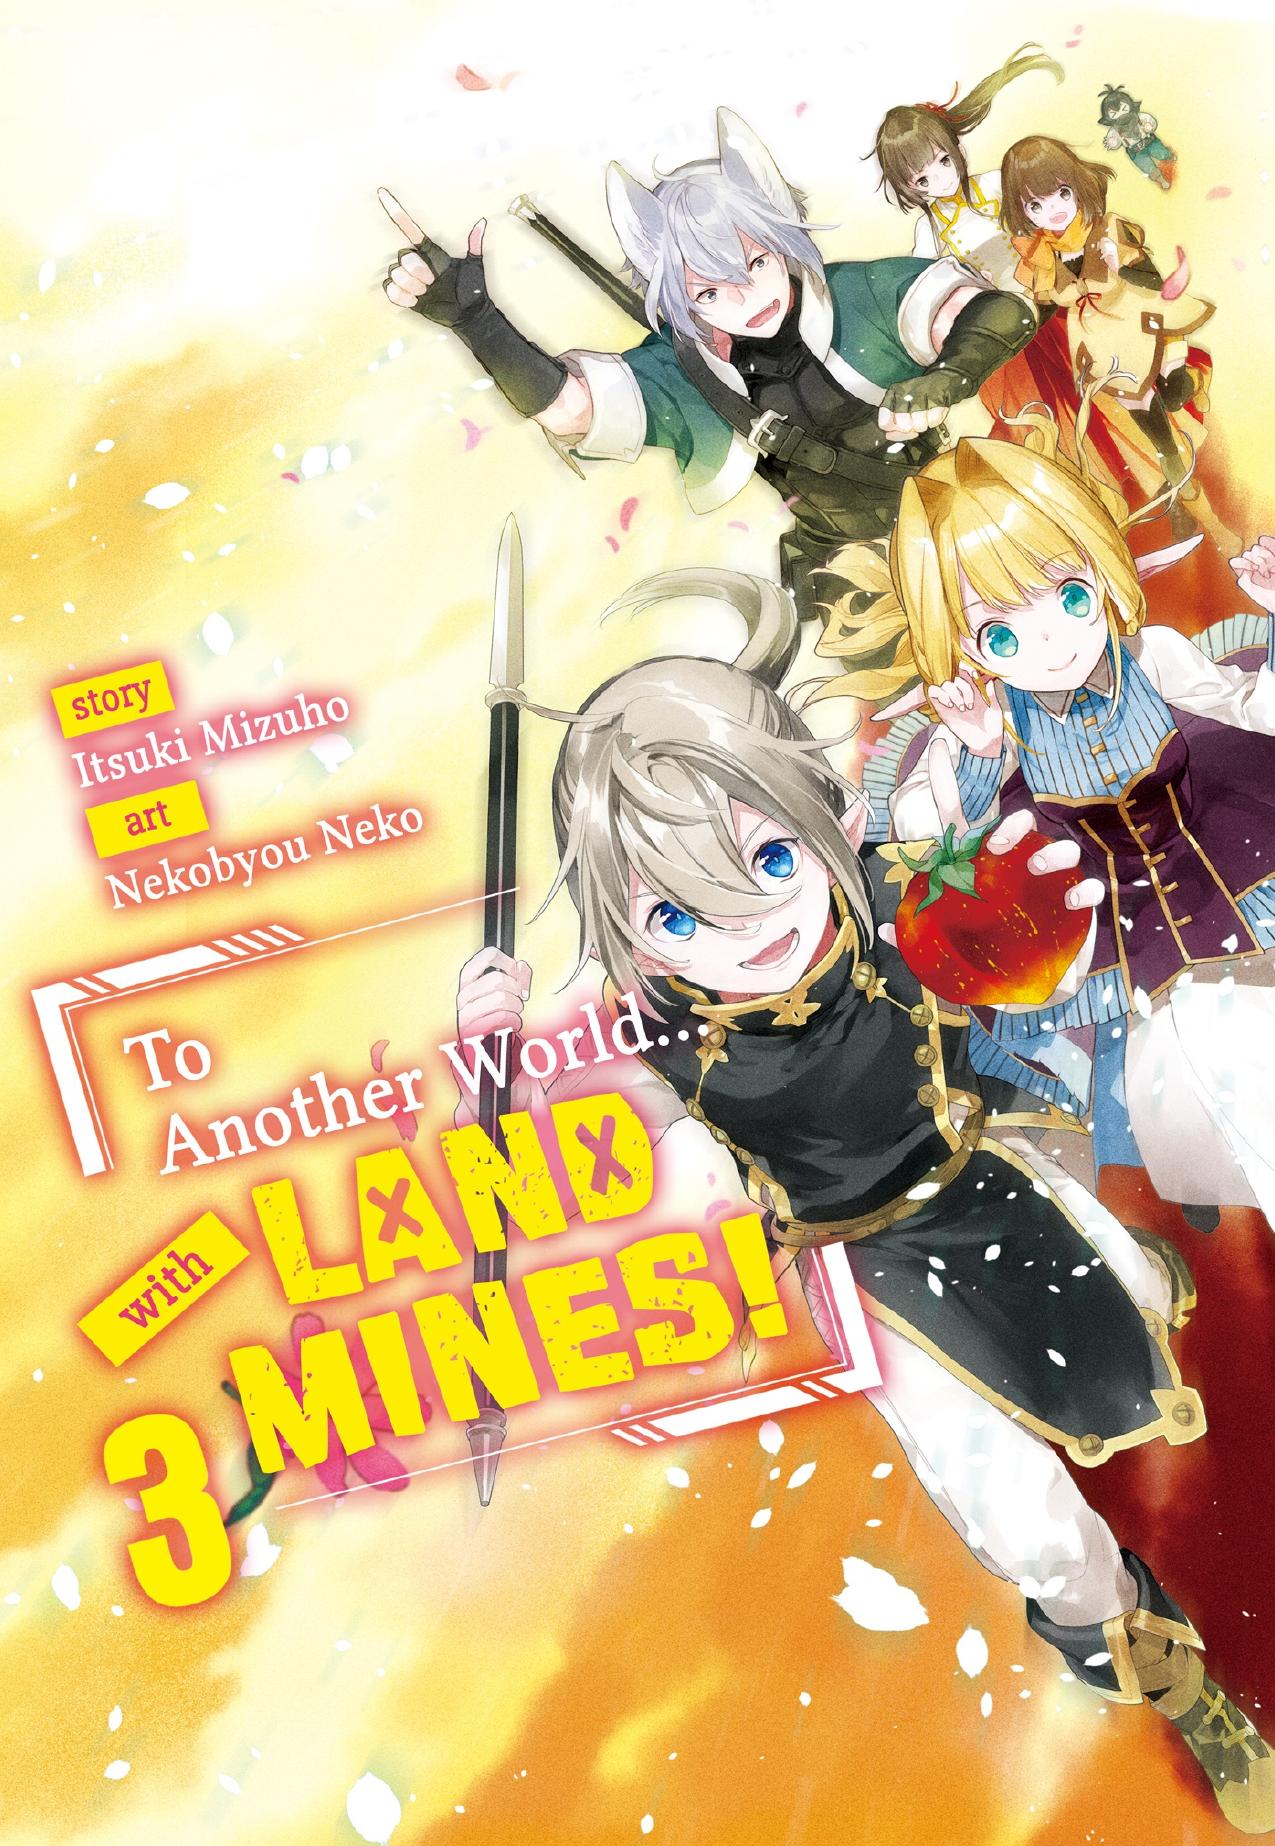 To Another World... with Land Mines! Volume 3 by Itsuki Mizuho